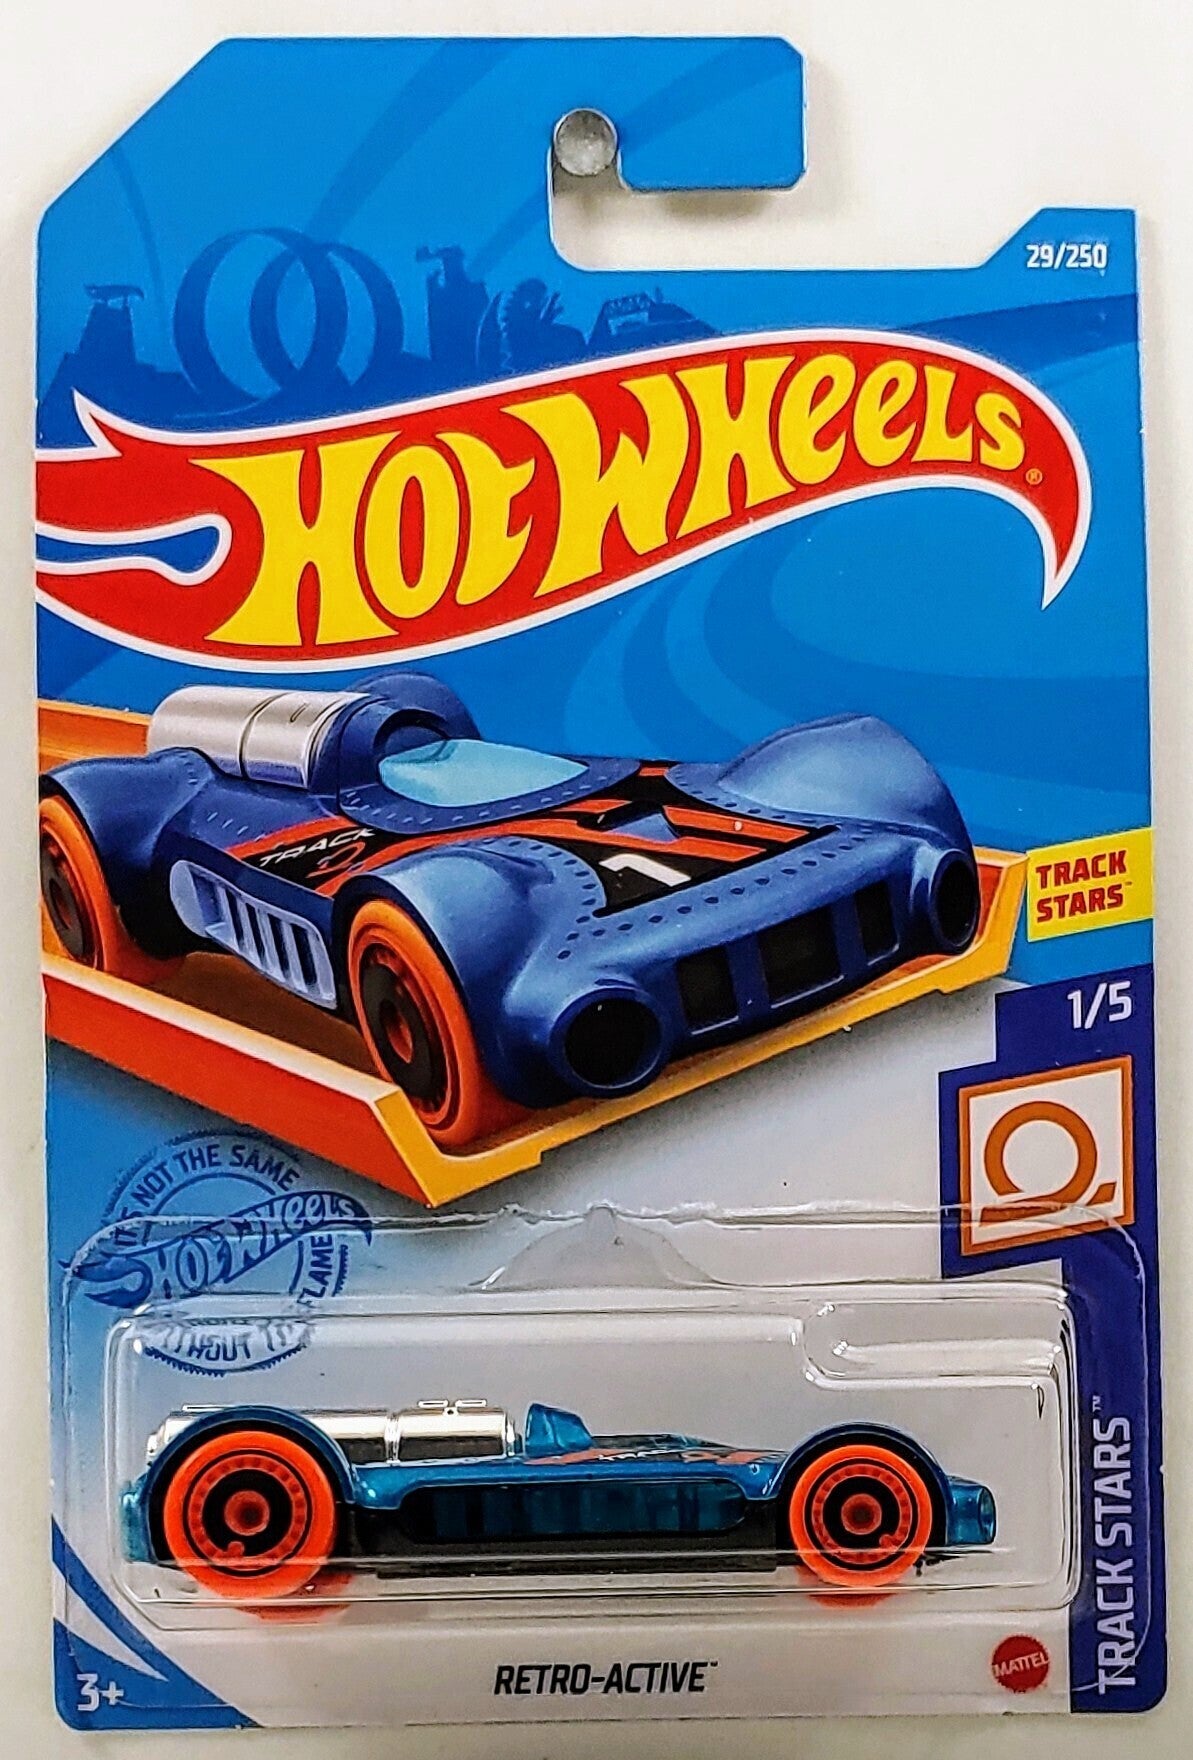 Hot Wheels 2021 - Collector # 029/250 - Track Stars 1/5 - Retro-Active - Blue - IC